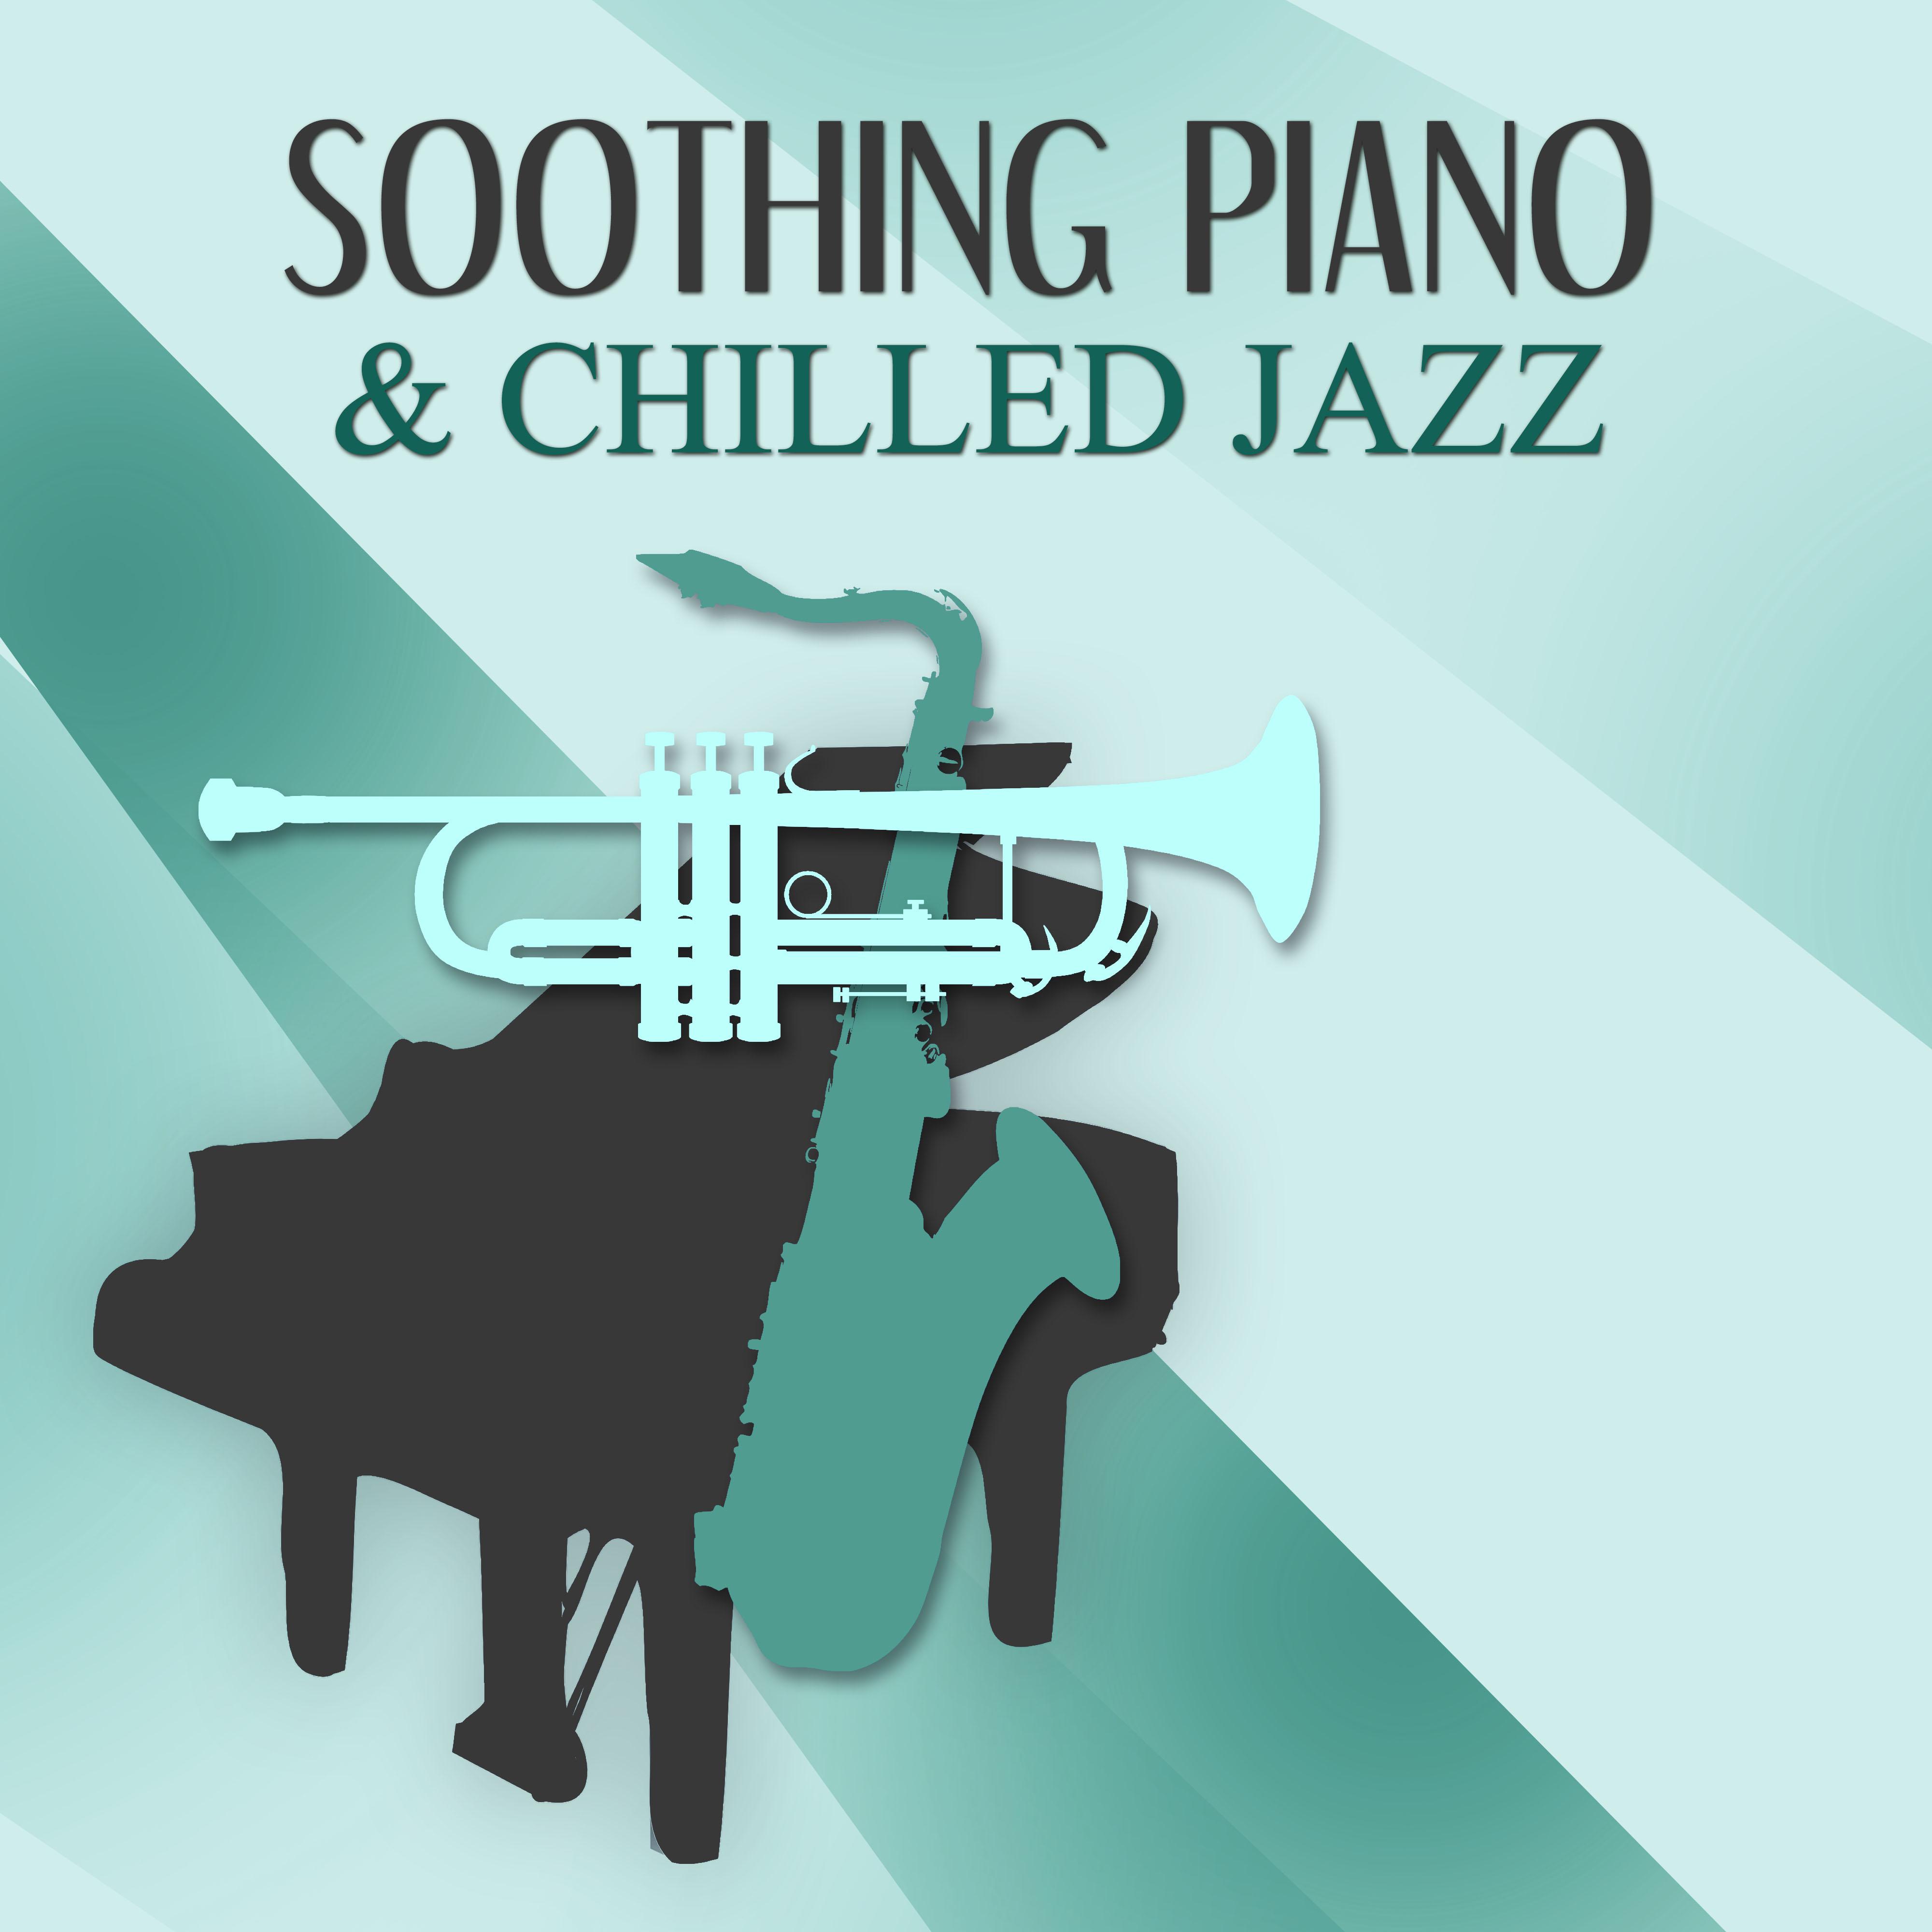 Soothing Piano & Chilled Jazz – Beautiful Piano Bar Jazz for Relaxation, Smooth Jazz, Soothing Piano Sounds, Background Music to Relax